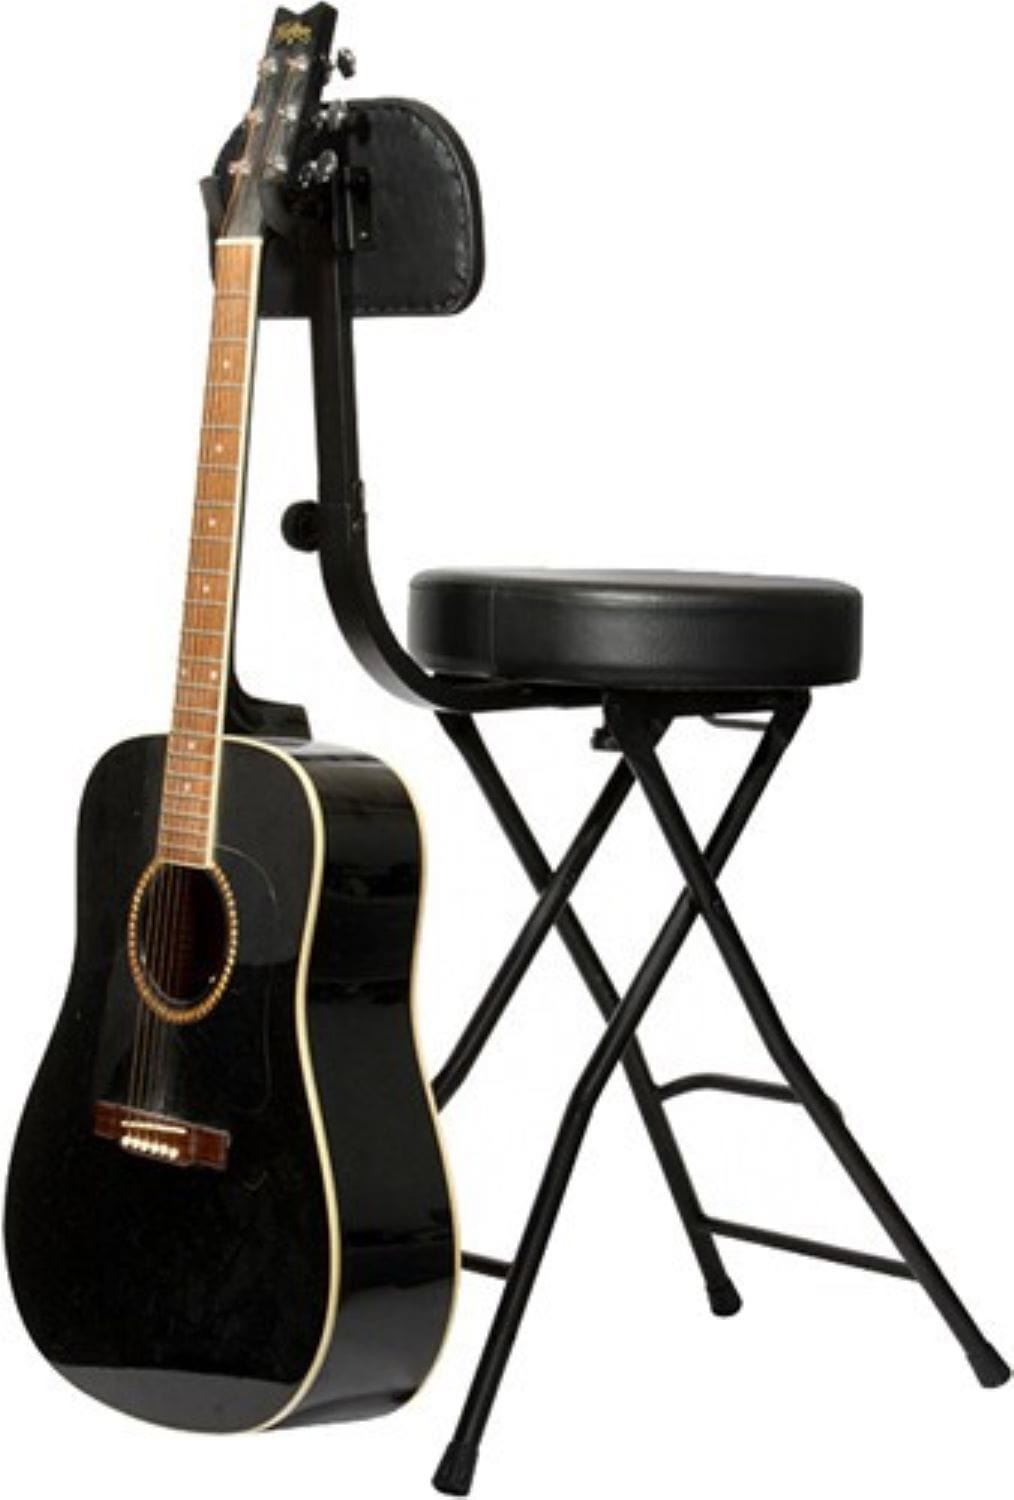 On-Stage DT8000 Guitar Stool with Hanger - PSSL ProSound and Stage Lighting